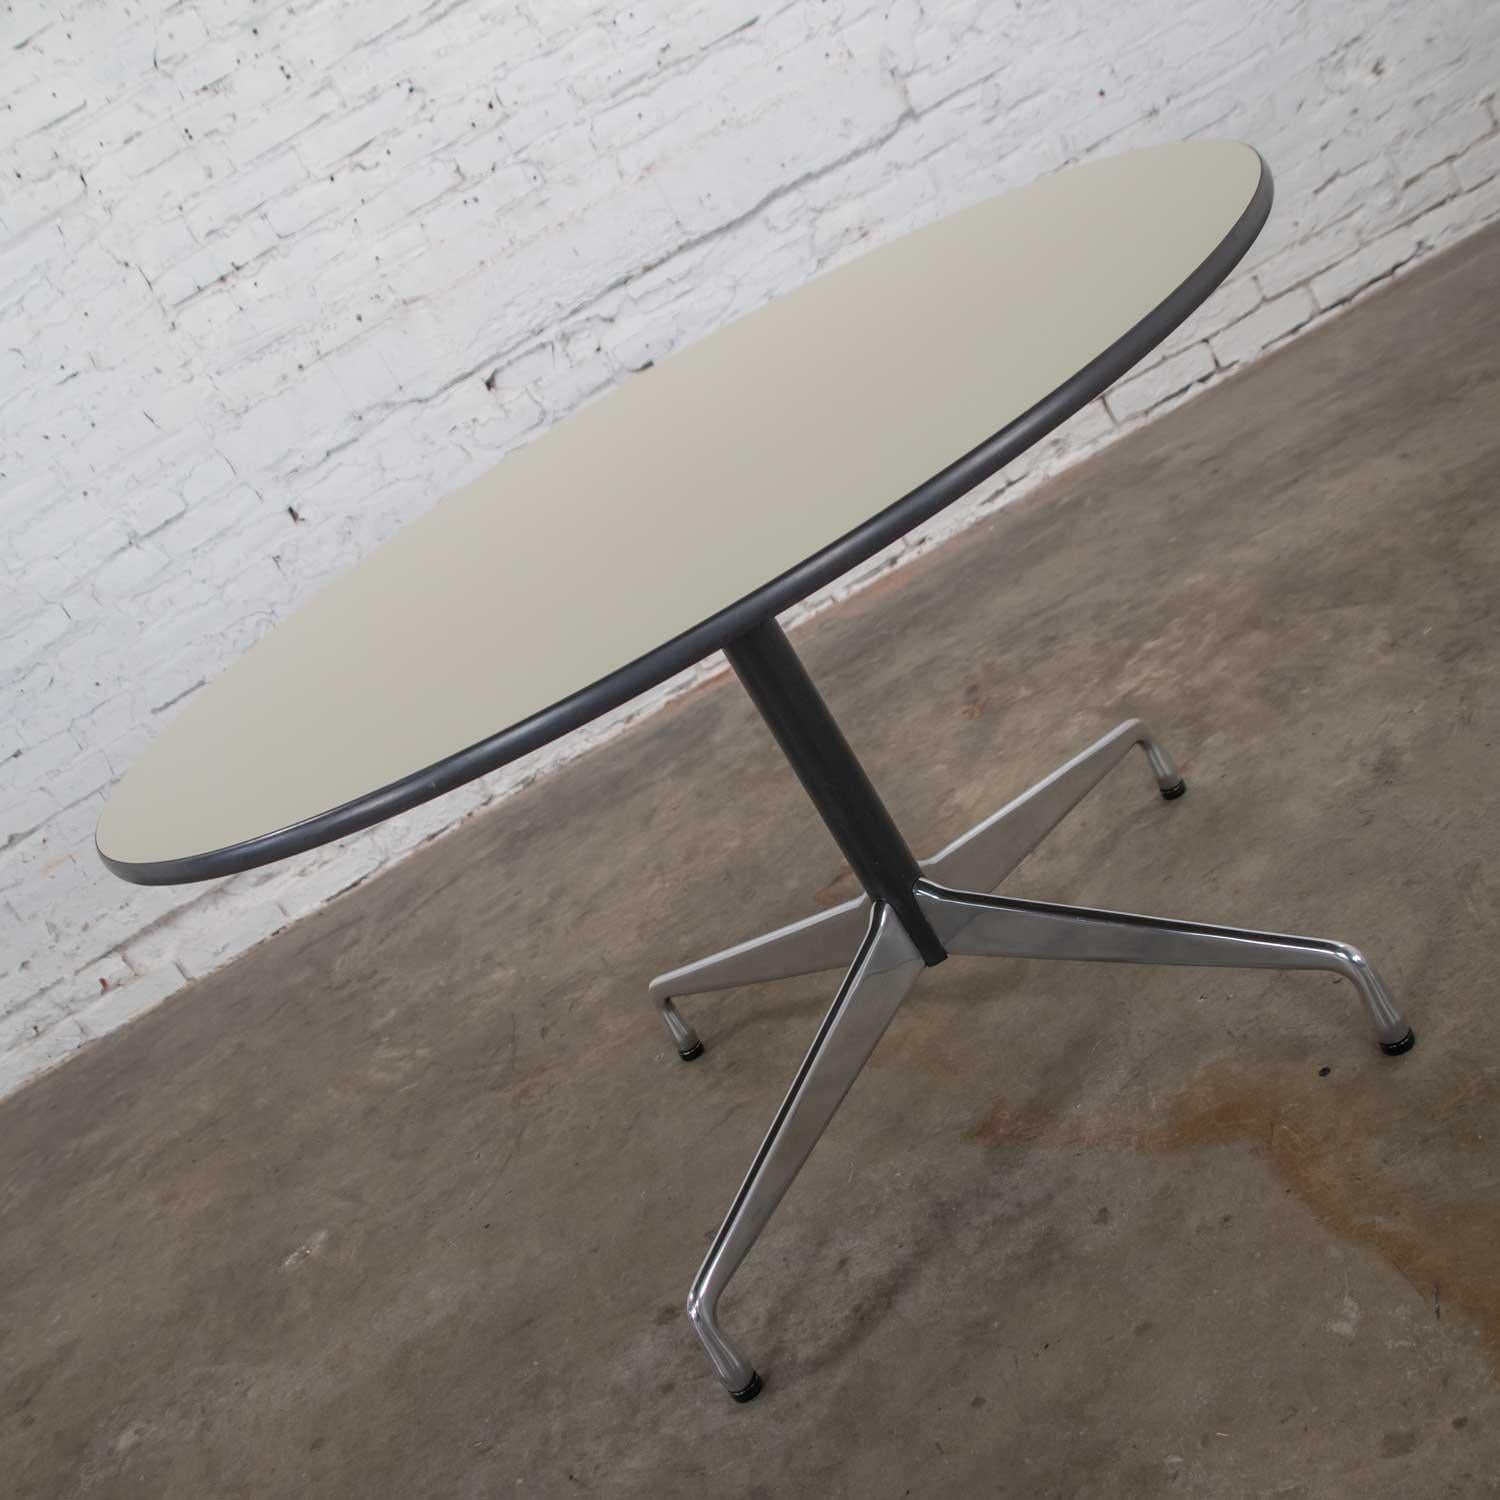 Fabulous Eames Herman Miller round table with the universal base and off-white laminate top with black edge trim and black painted shaft. Wonderful vintage condition. There is a very small nick on the edge of the white laminate but does not detract